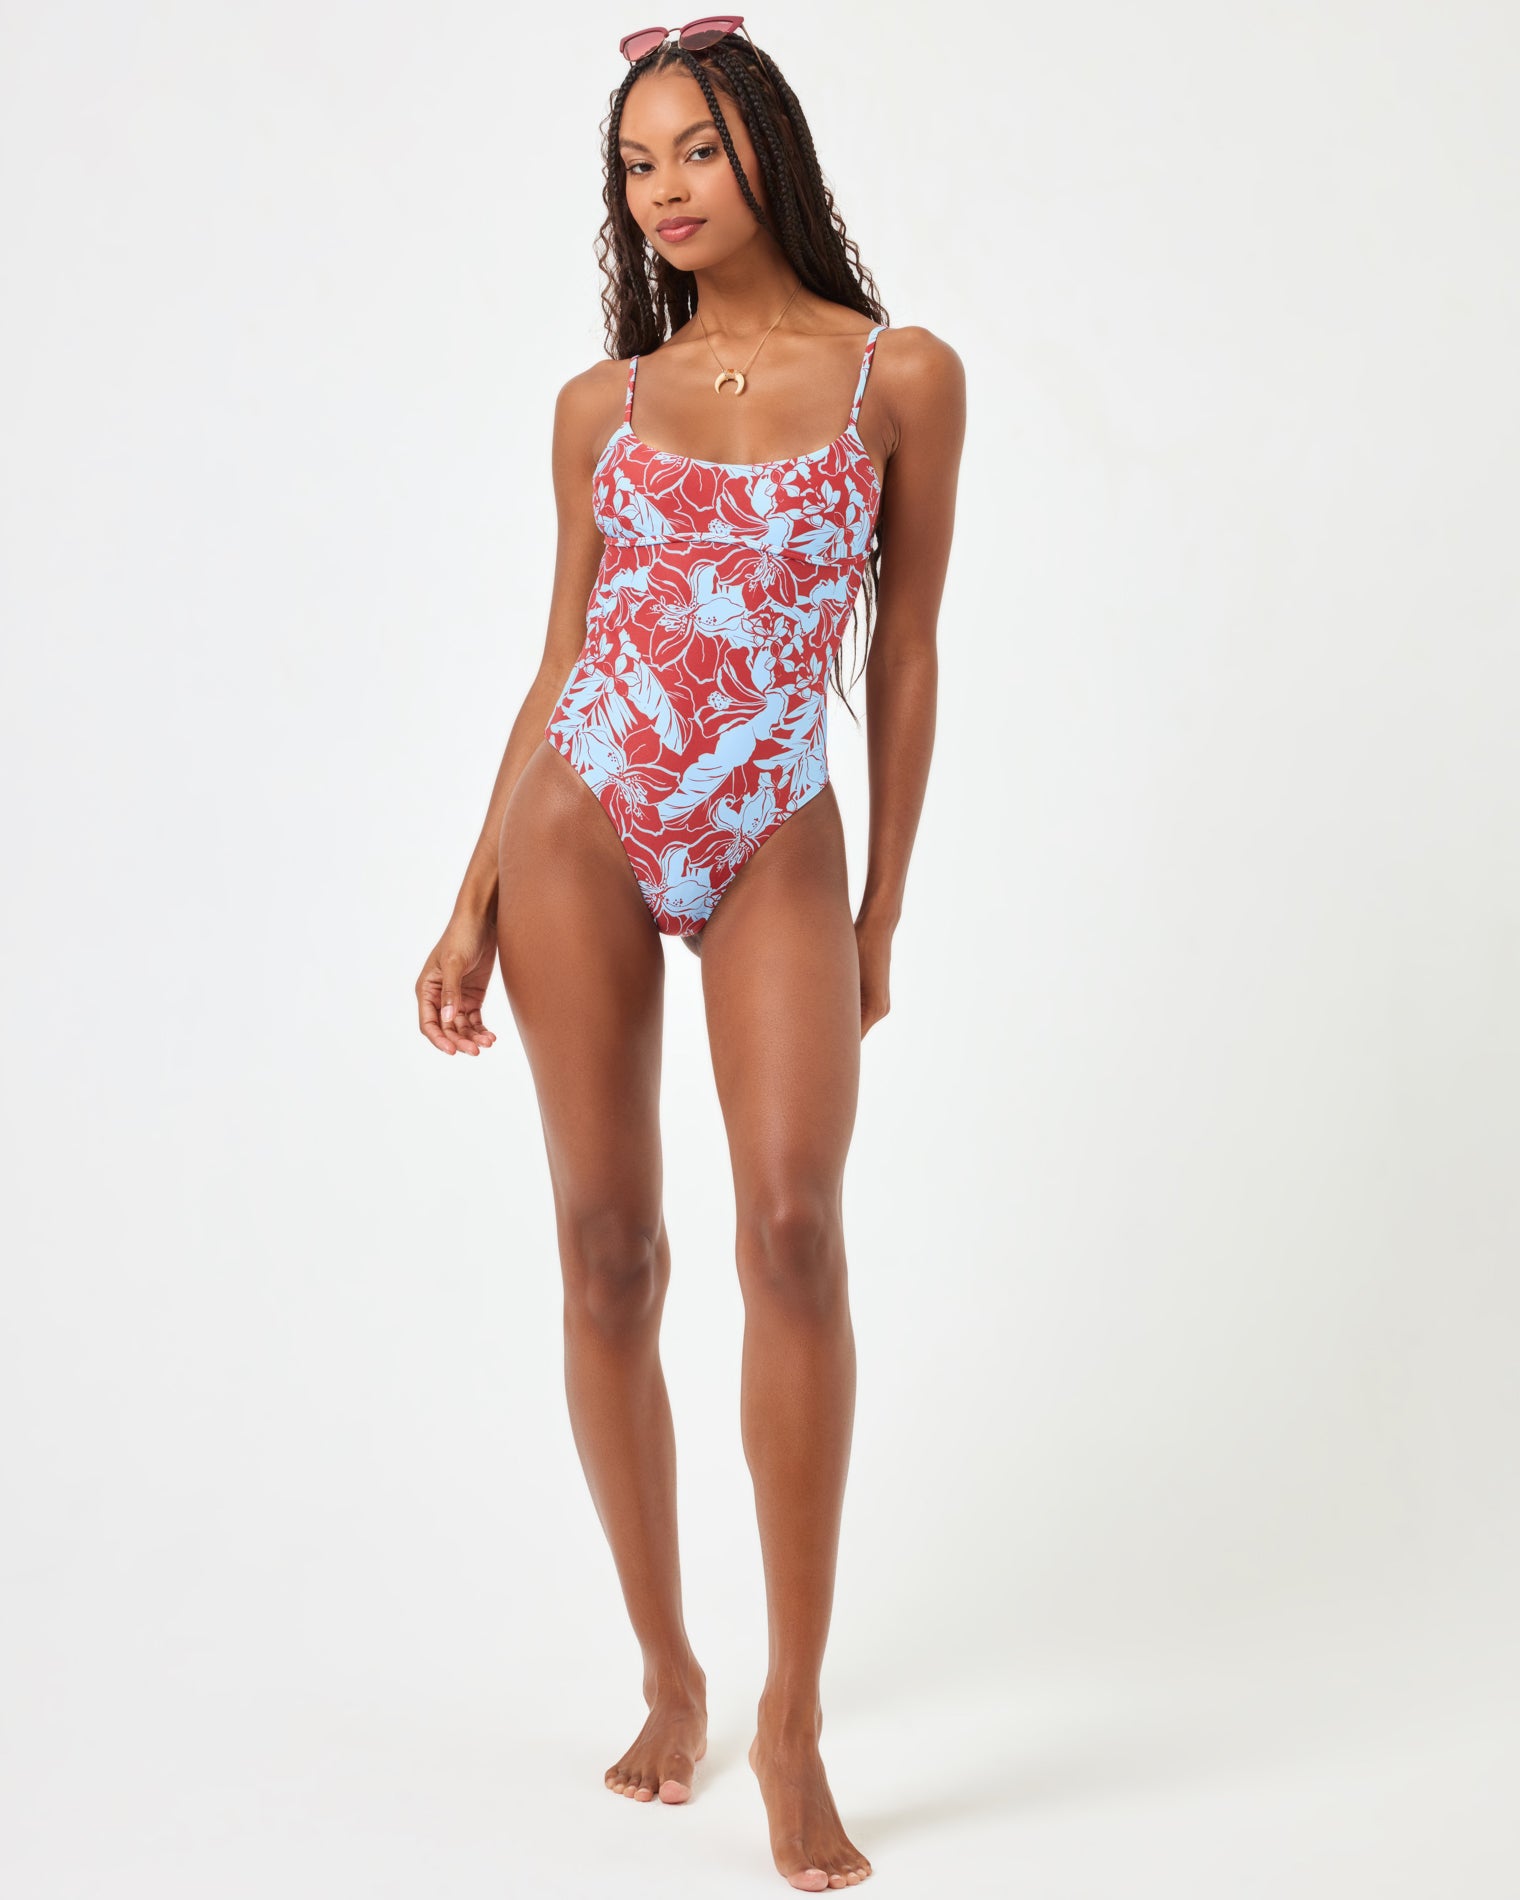 Eco Chic Econyl® Bree One Piece - Going Tropical Going Tropical | Model: Taelor (size: S)